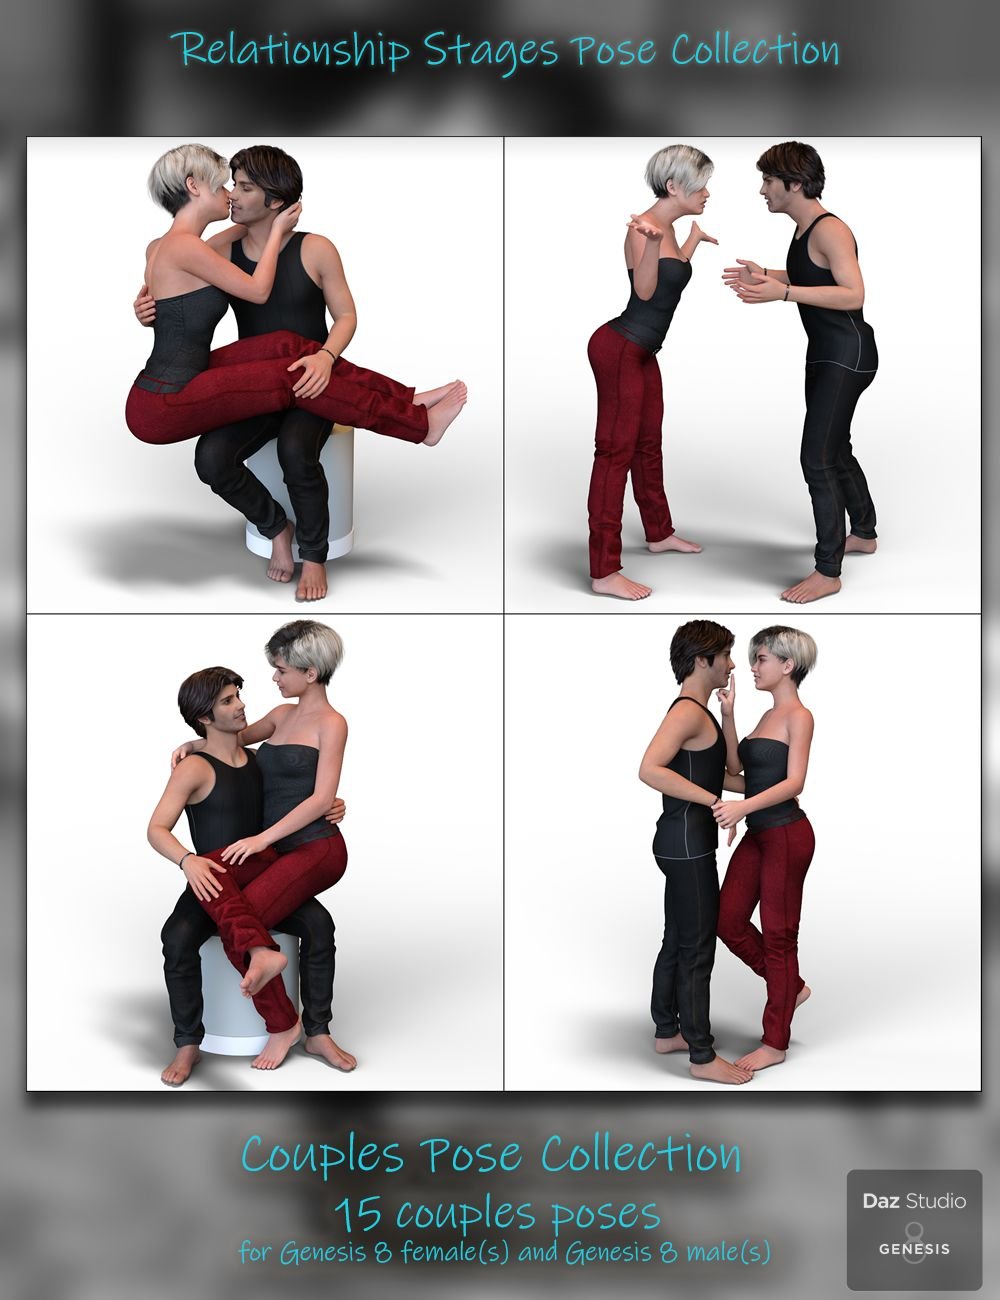 Relationship Stages Pose Collection for Genesis 8